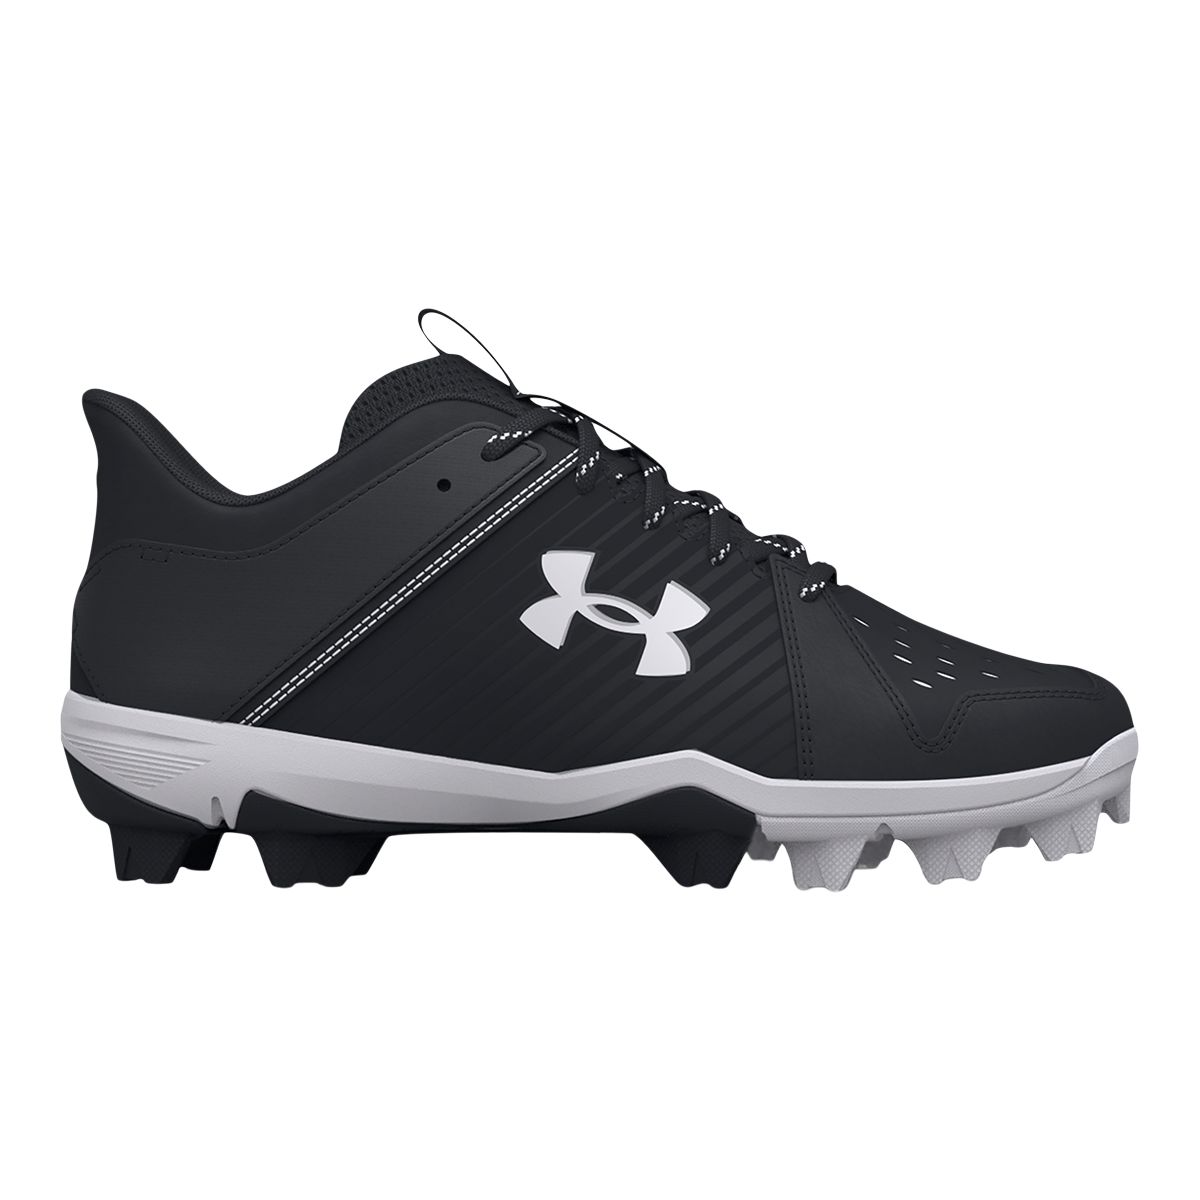 Image of Under Armour Kids' Leadoff 23 Low RM Baseball Cleats